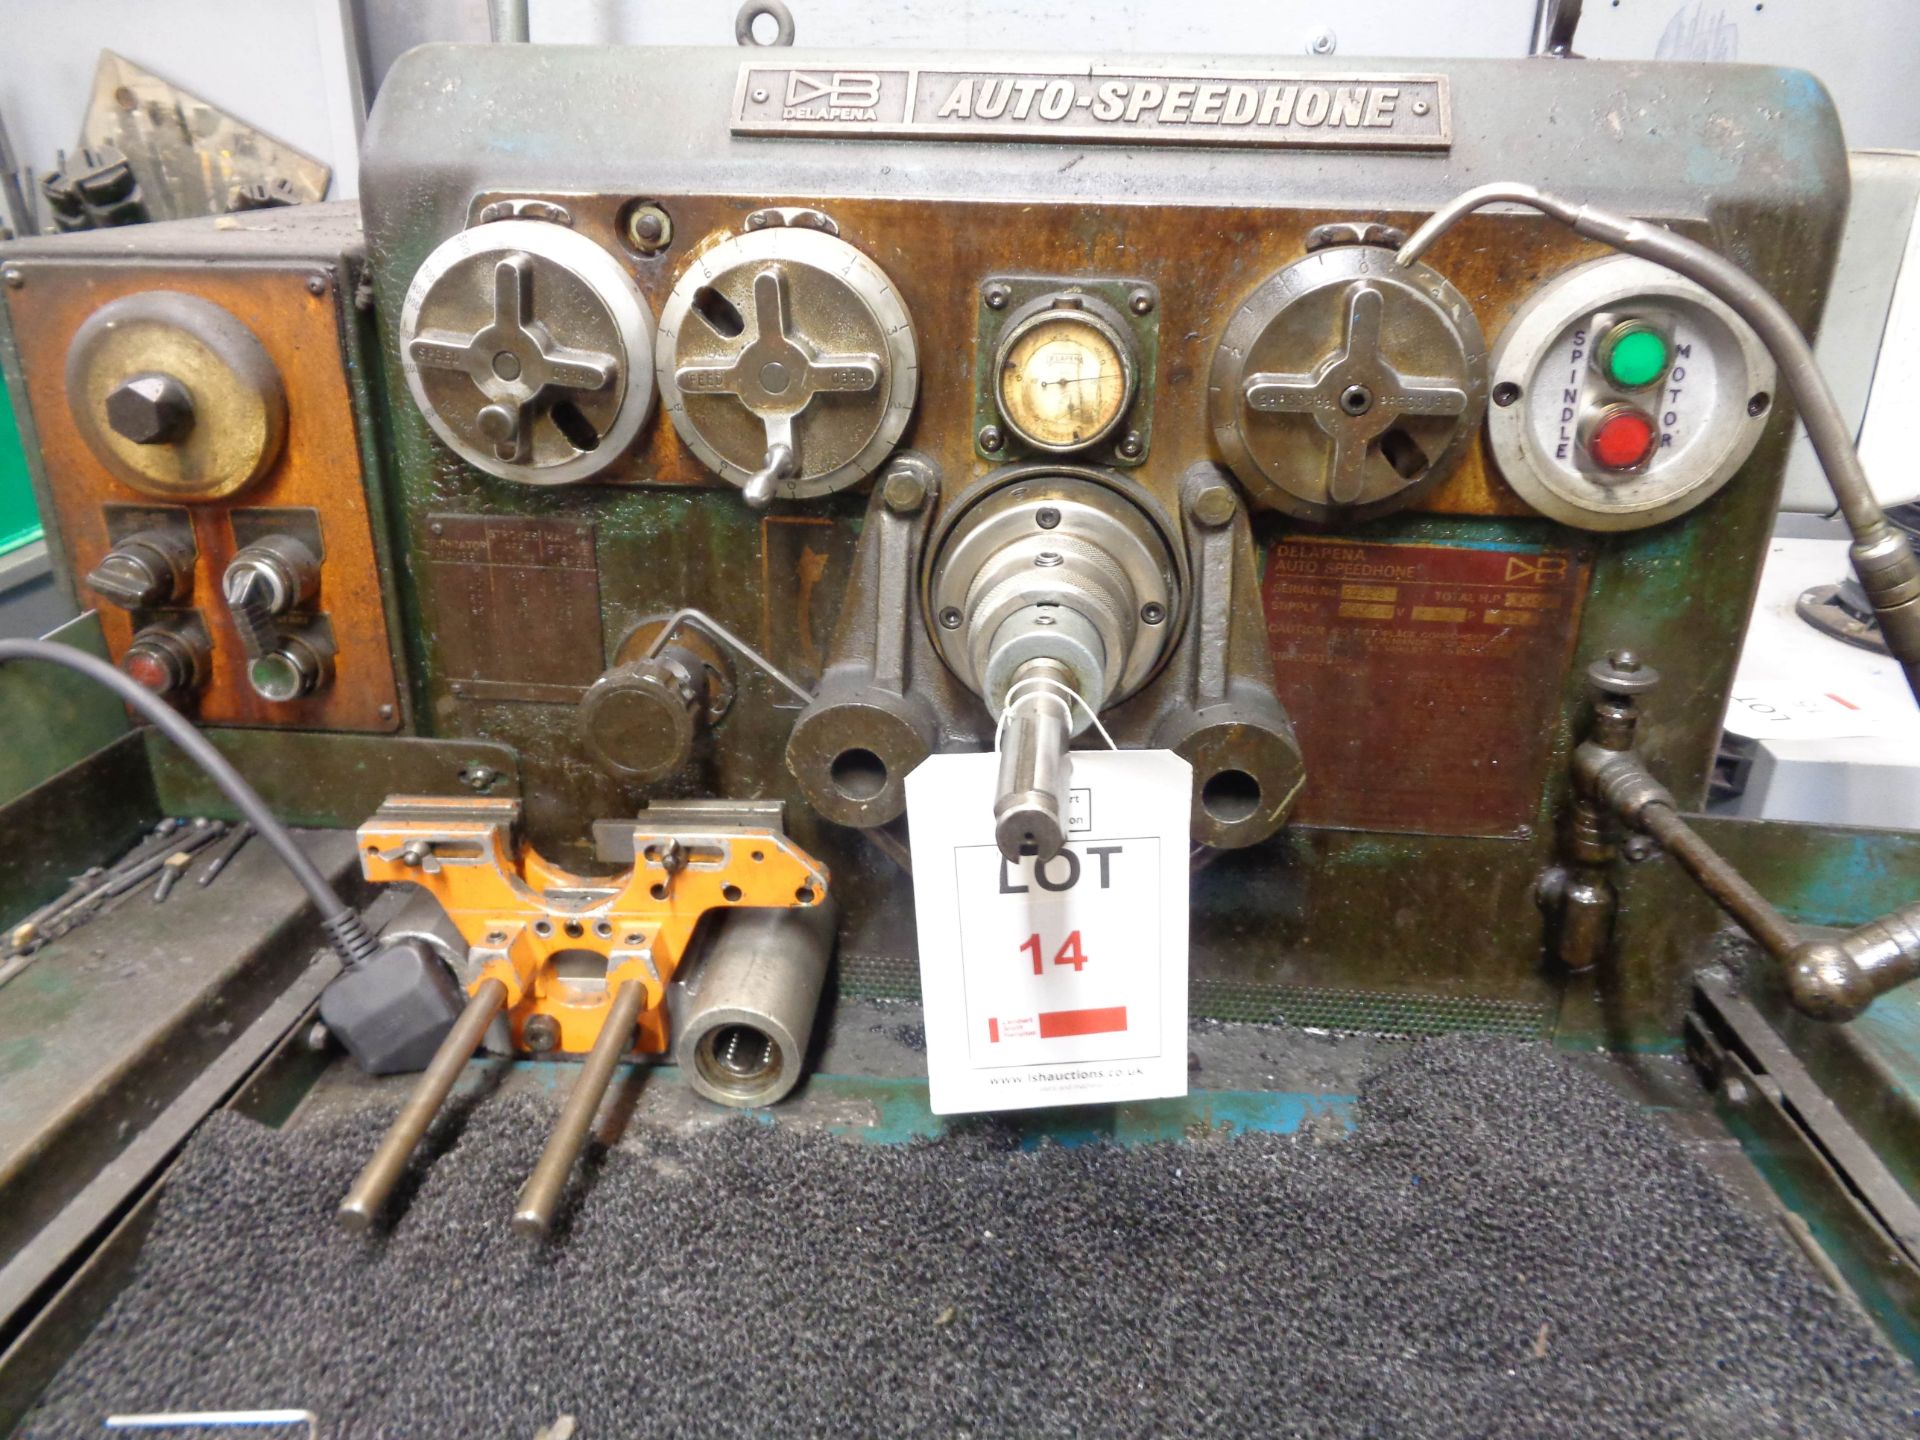 Delapena Auto Speed Hone horizontal honing machine with assorted tooling, serial no. 255224 A work - Image 3 of 6